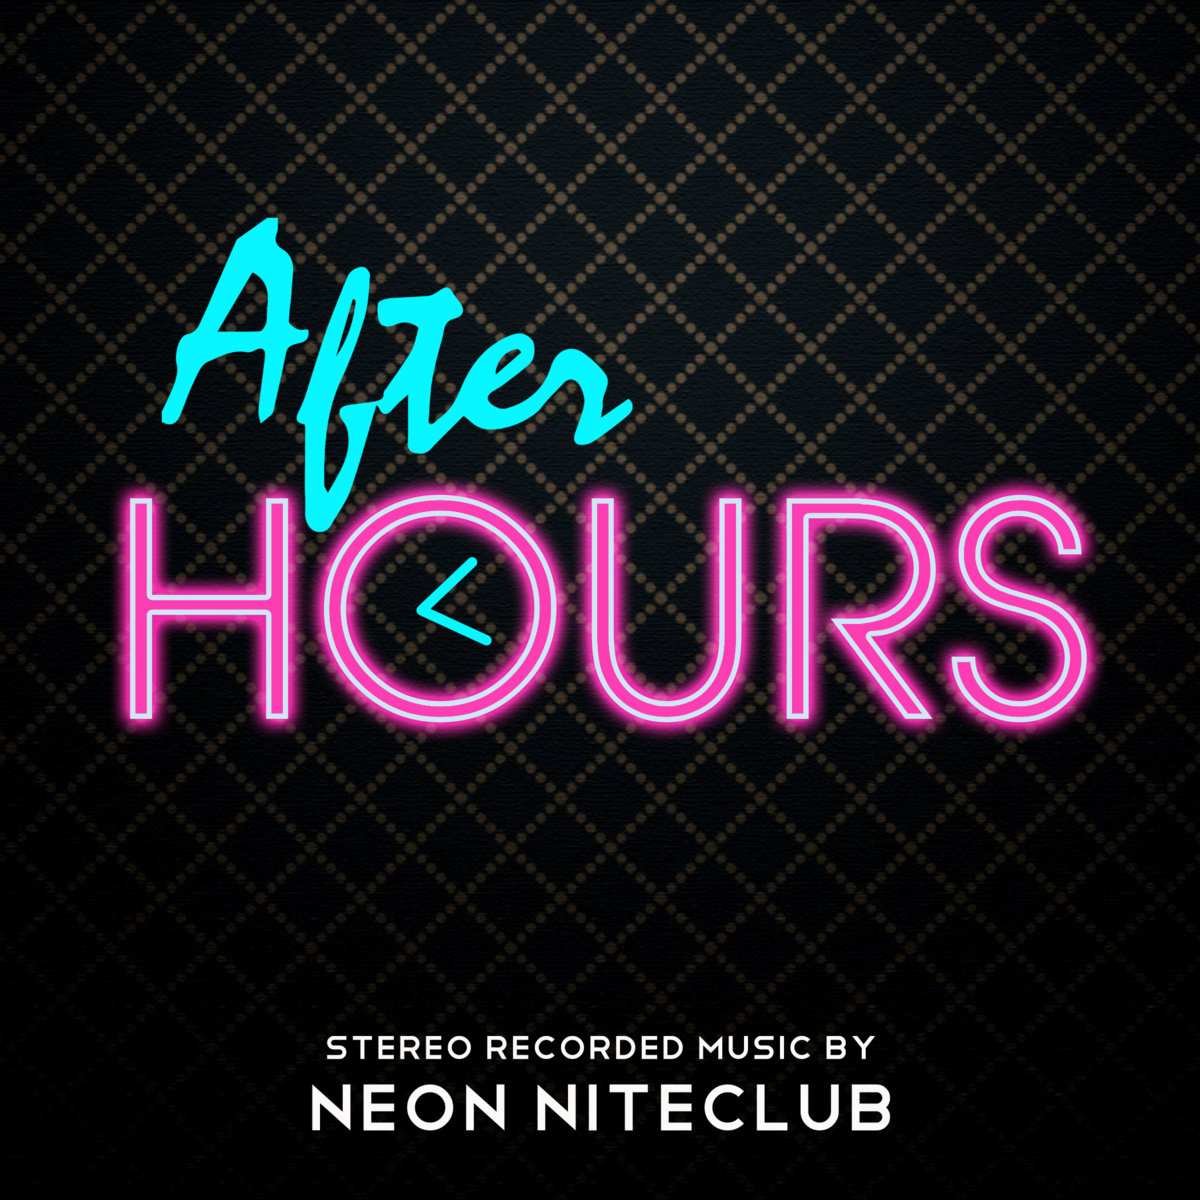 Neon Niteclub: After Hours – FrostClick.com | The Best ...